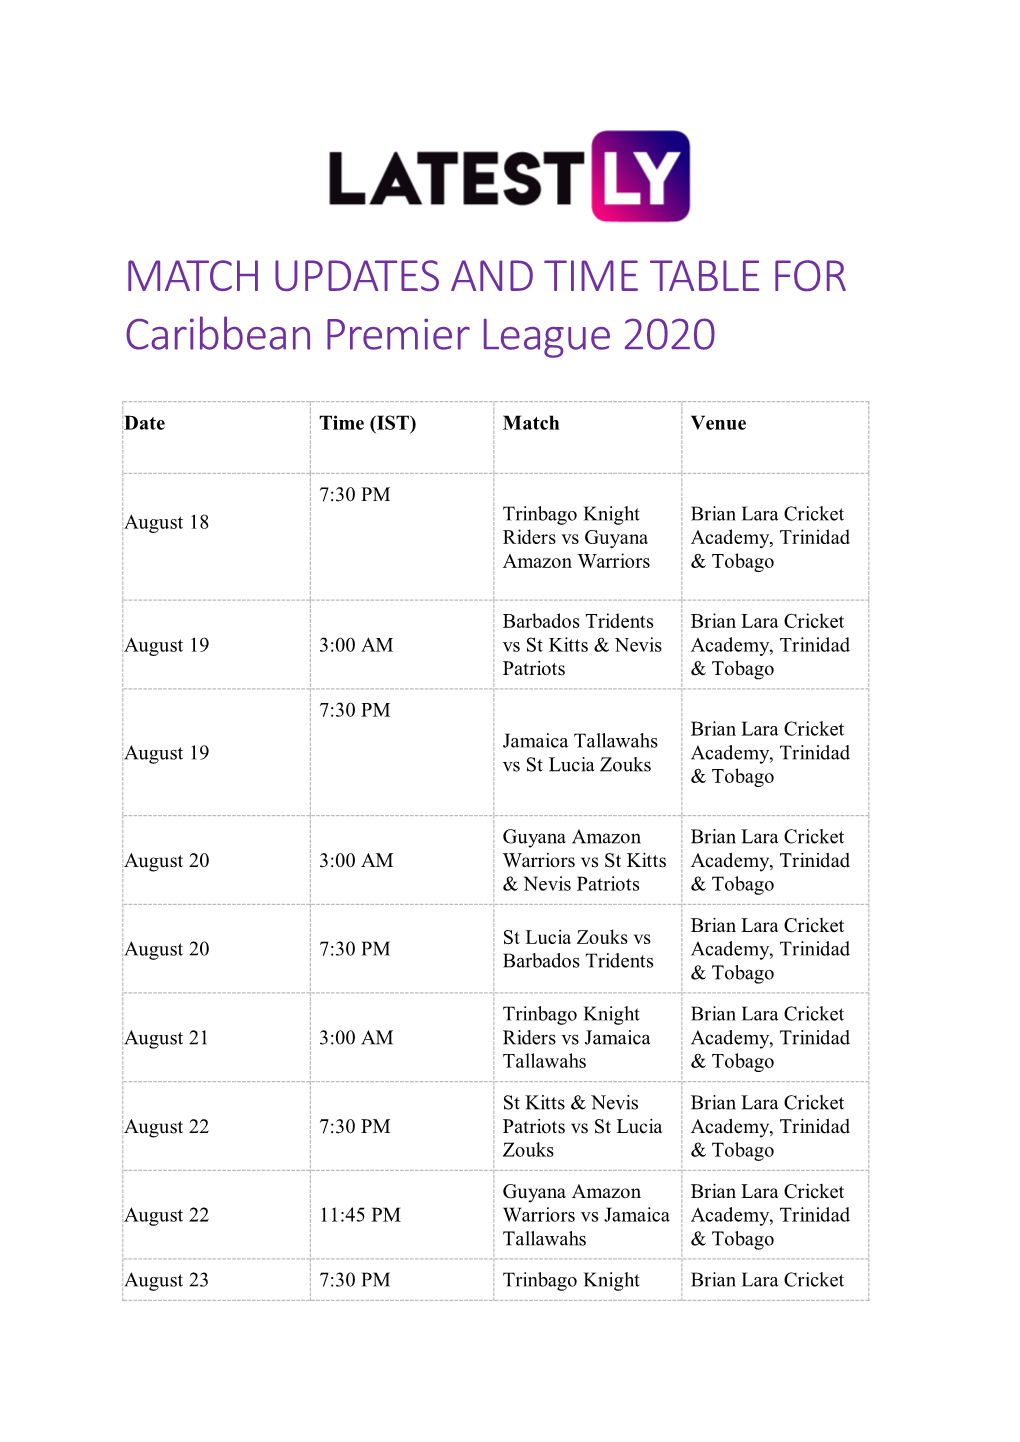 MATCH UPDATES and TIME TABLE for Caribbean Premier League 2020